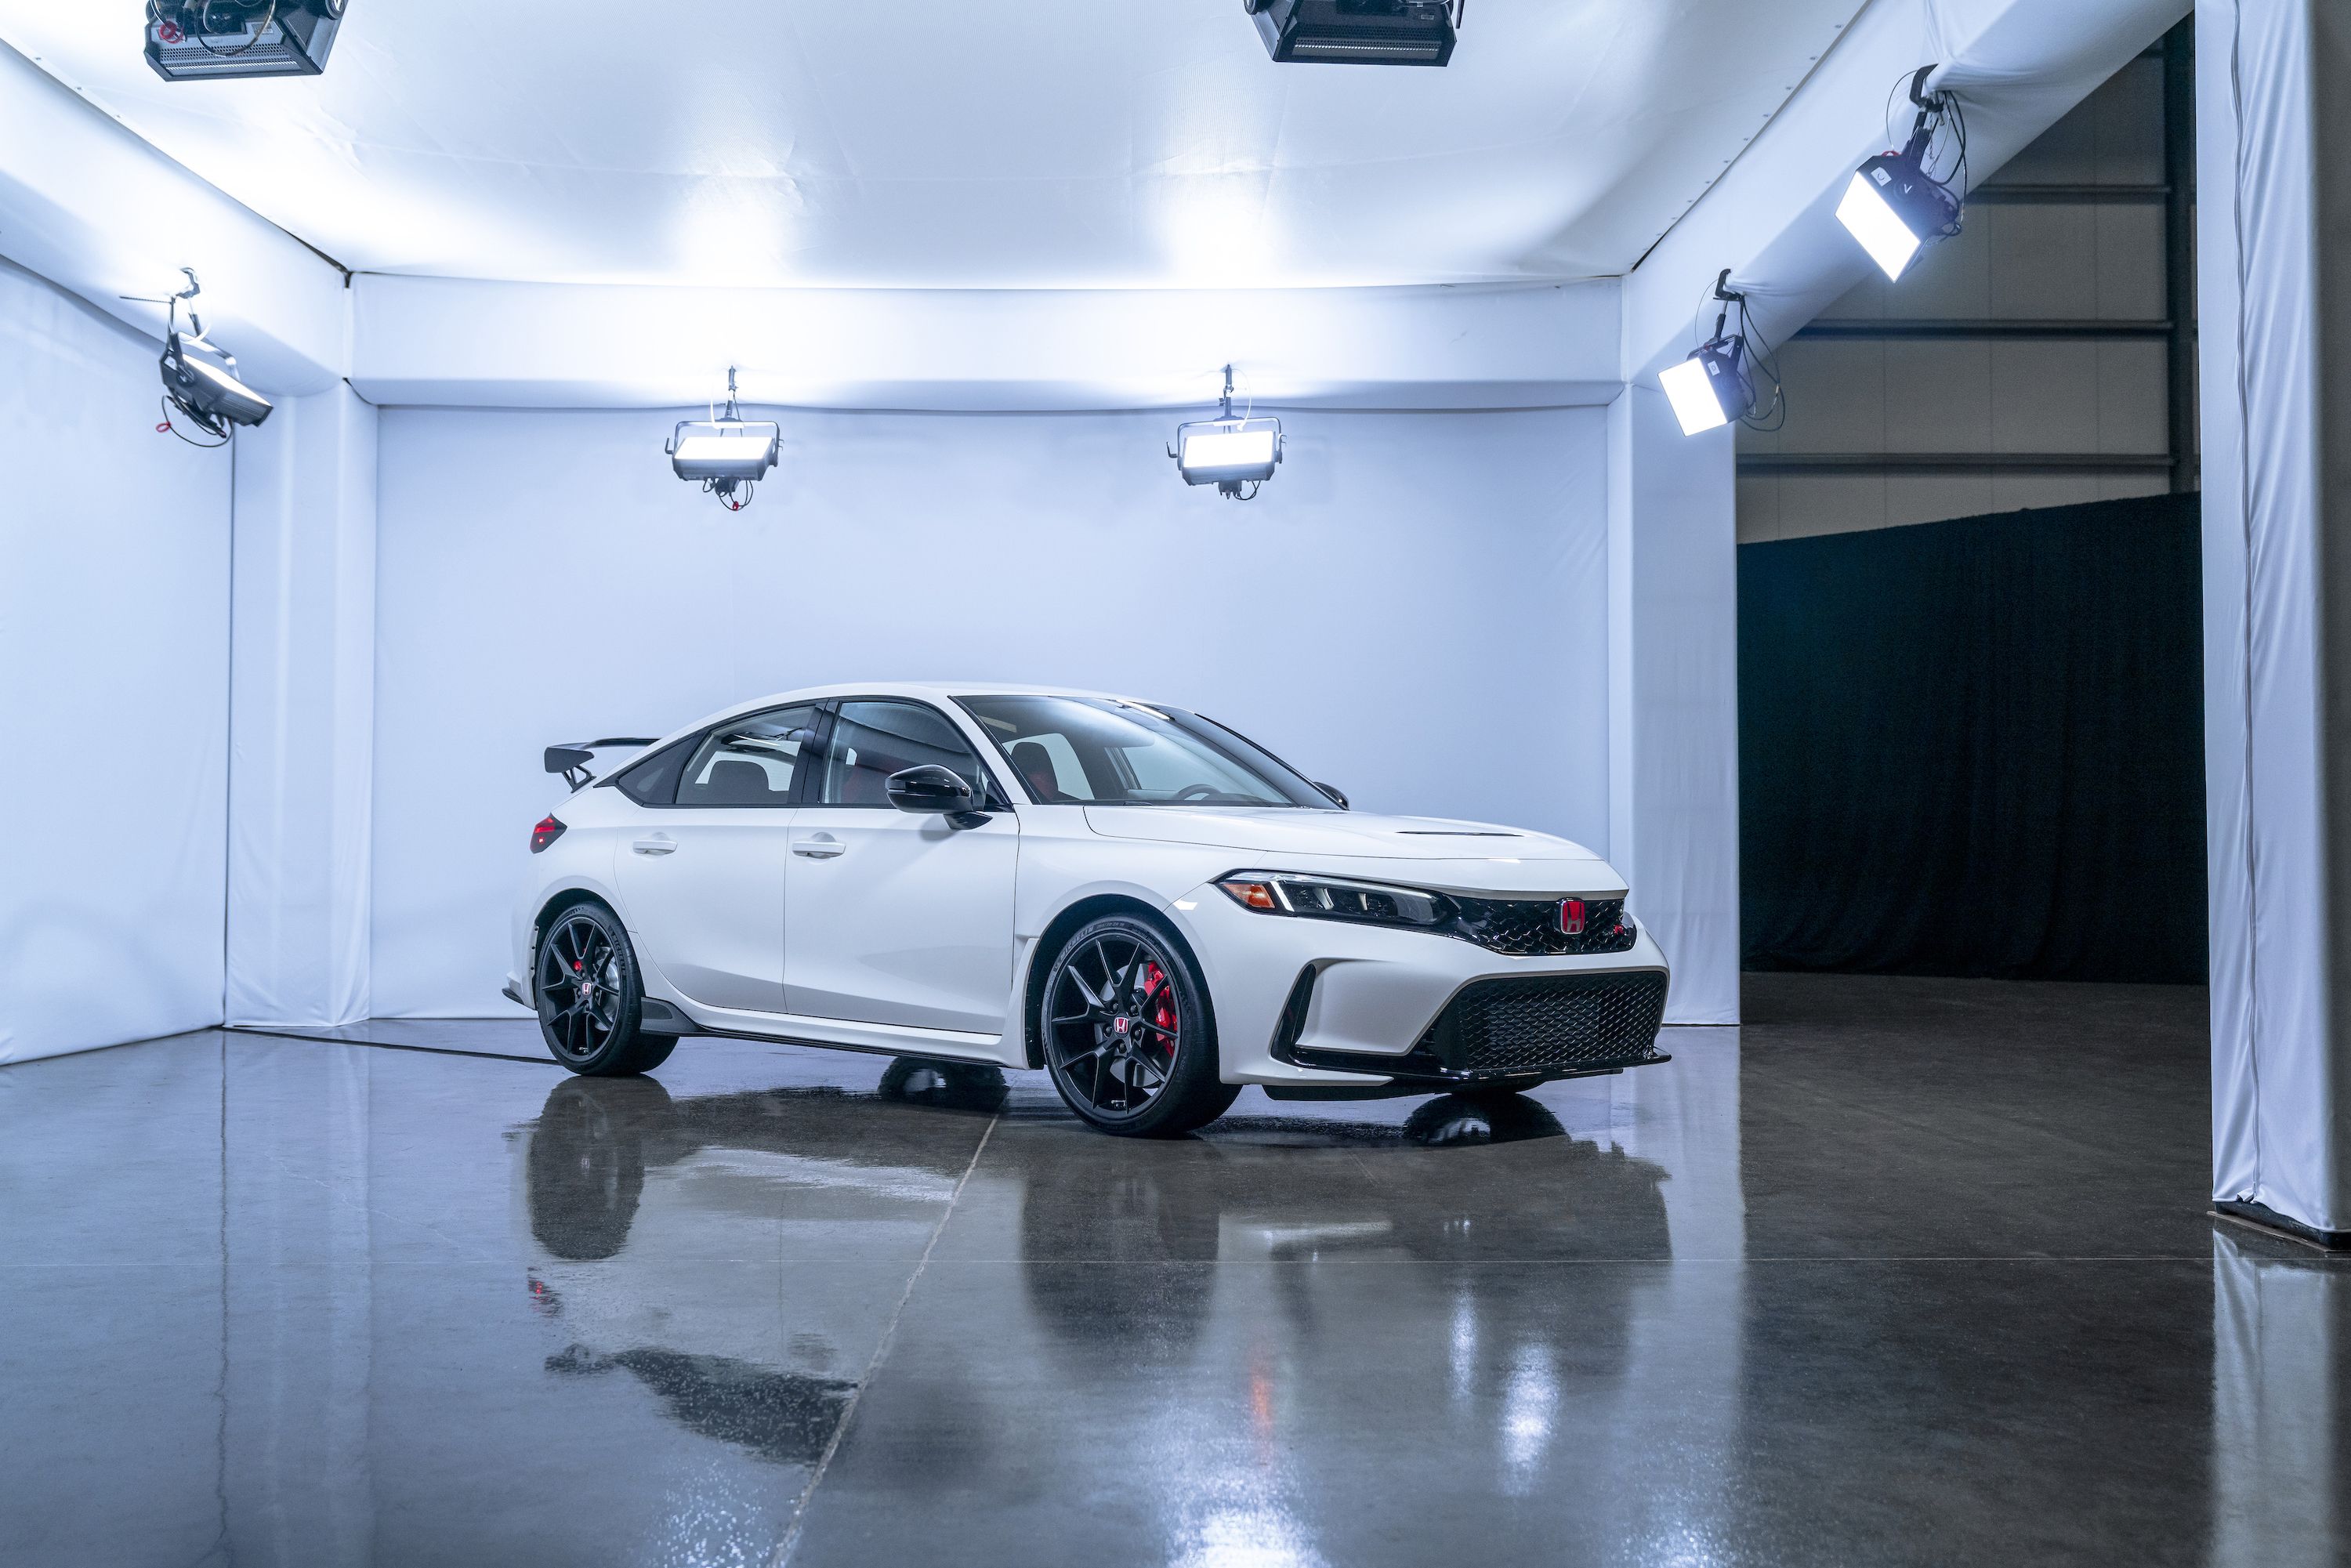 2023 Honda Civic Type R First Drive Review: All grown up isn't so bad -  Autoblog